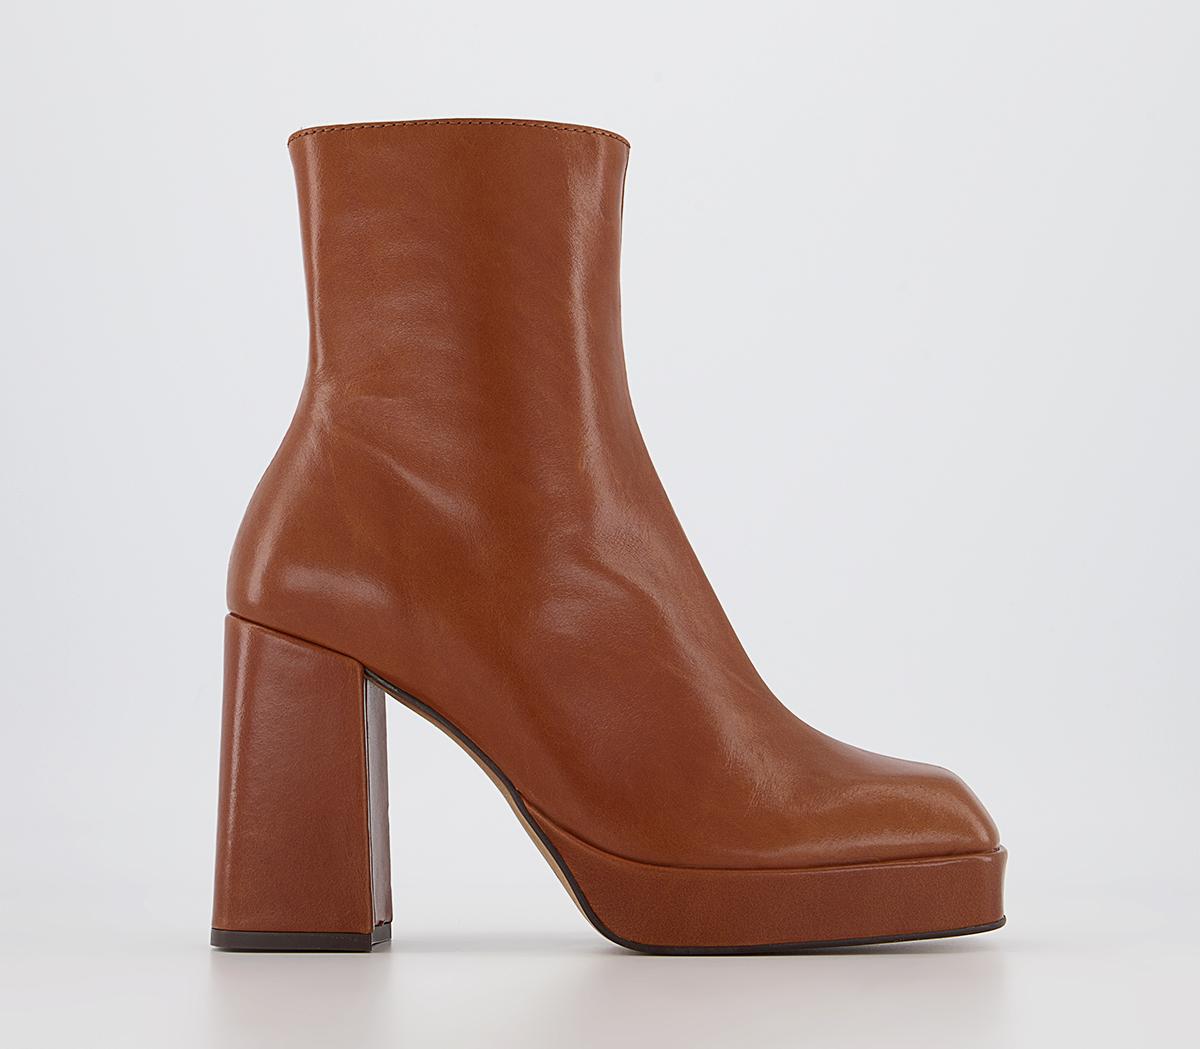 OFFICEAttitude Square Toe Platform Ankle BootsTan Leather